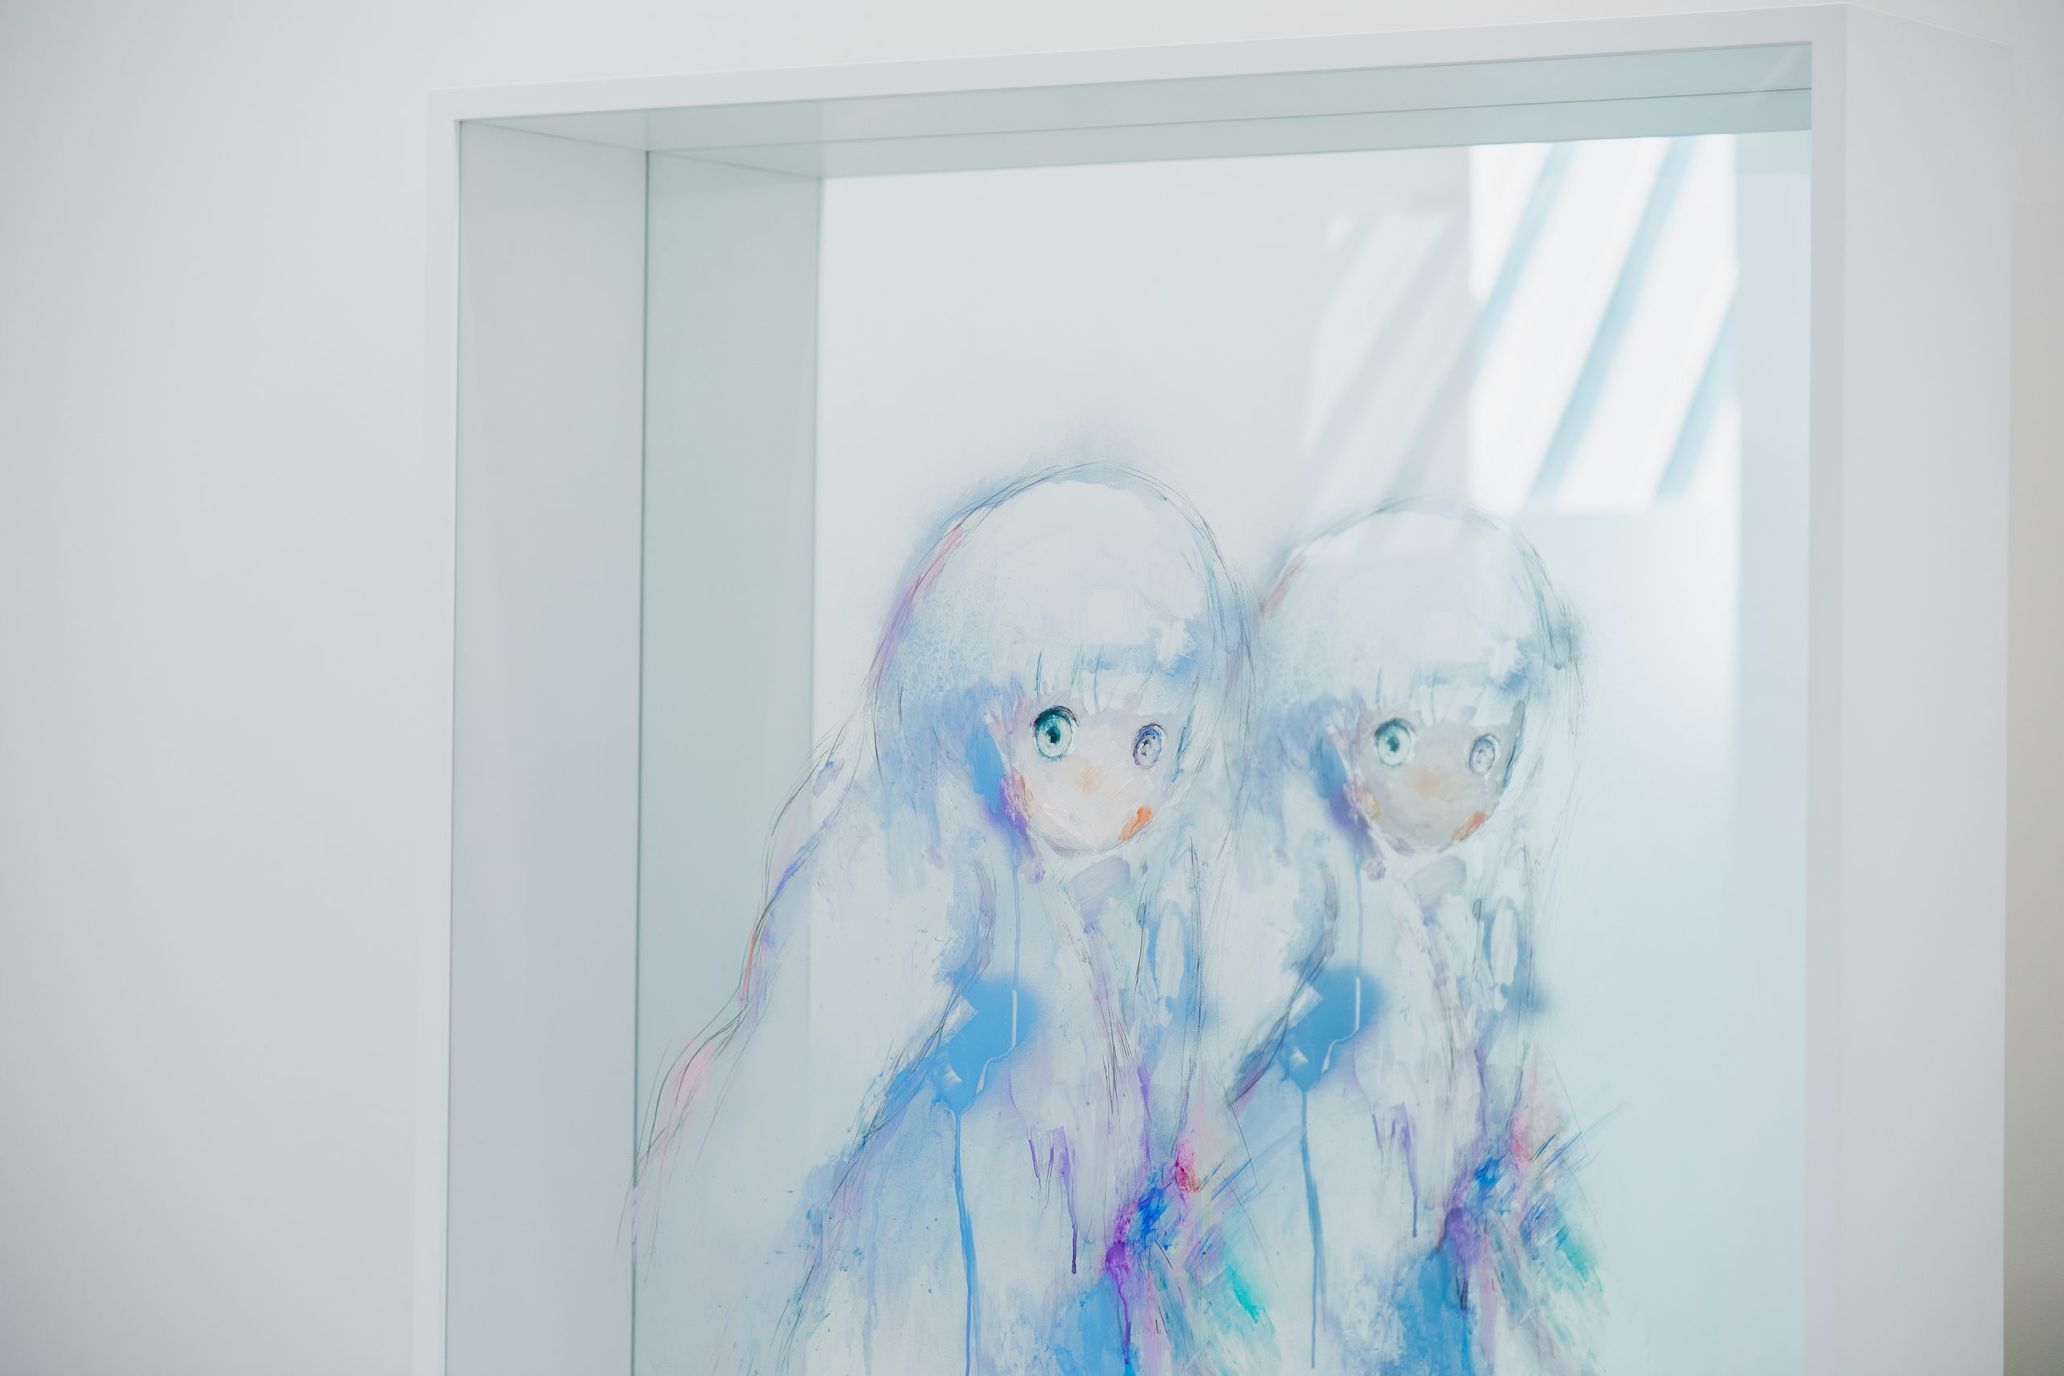 Taniguchi’s work presents both the paint applied to the surface of a transparent acrylic plate and the image created by its reflection in a mirror placed behind it.